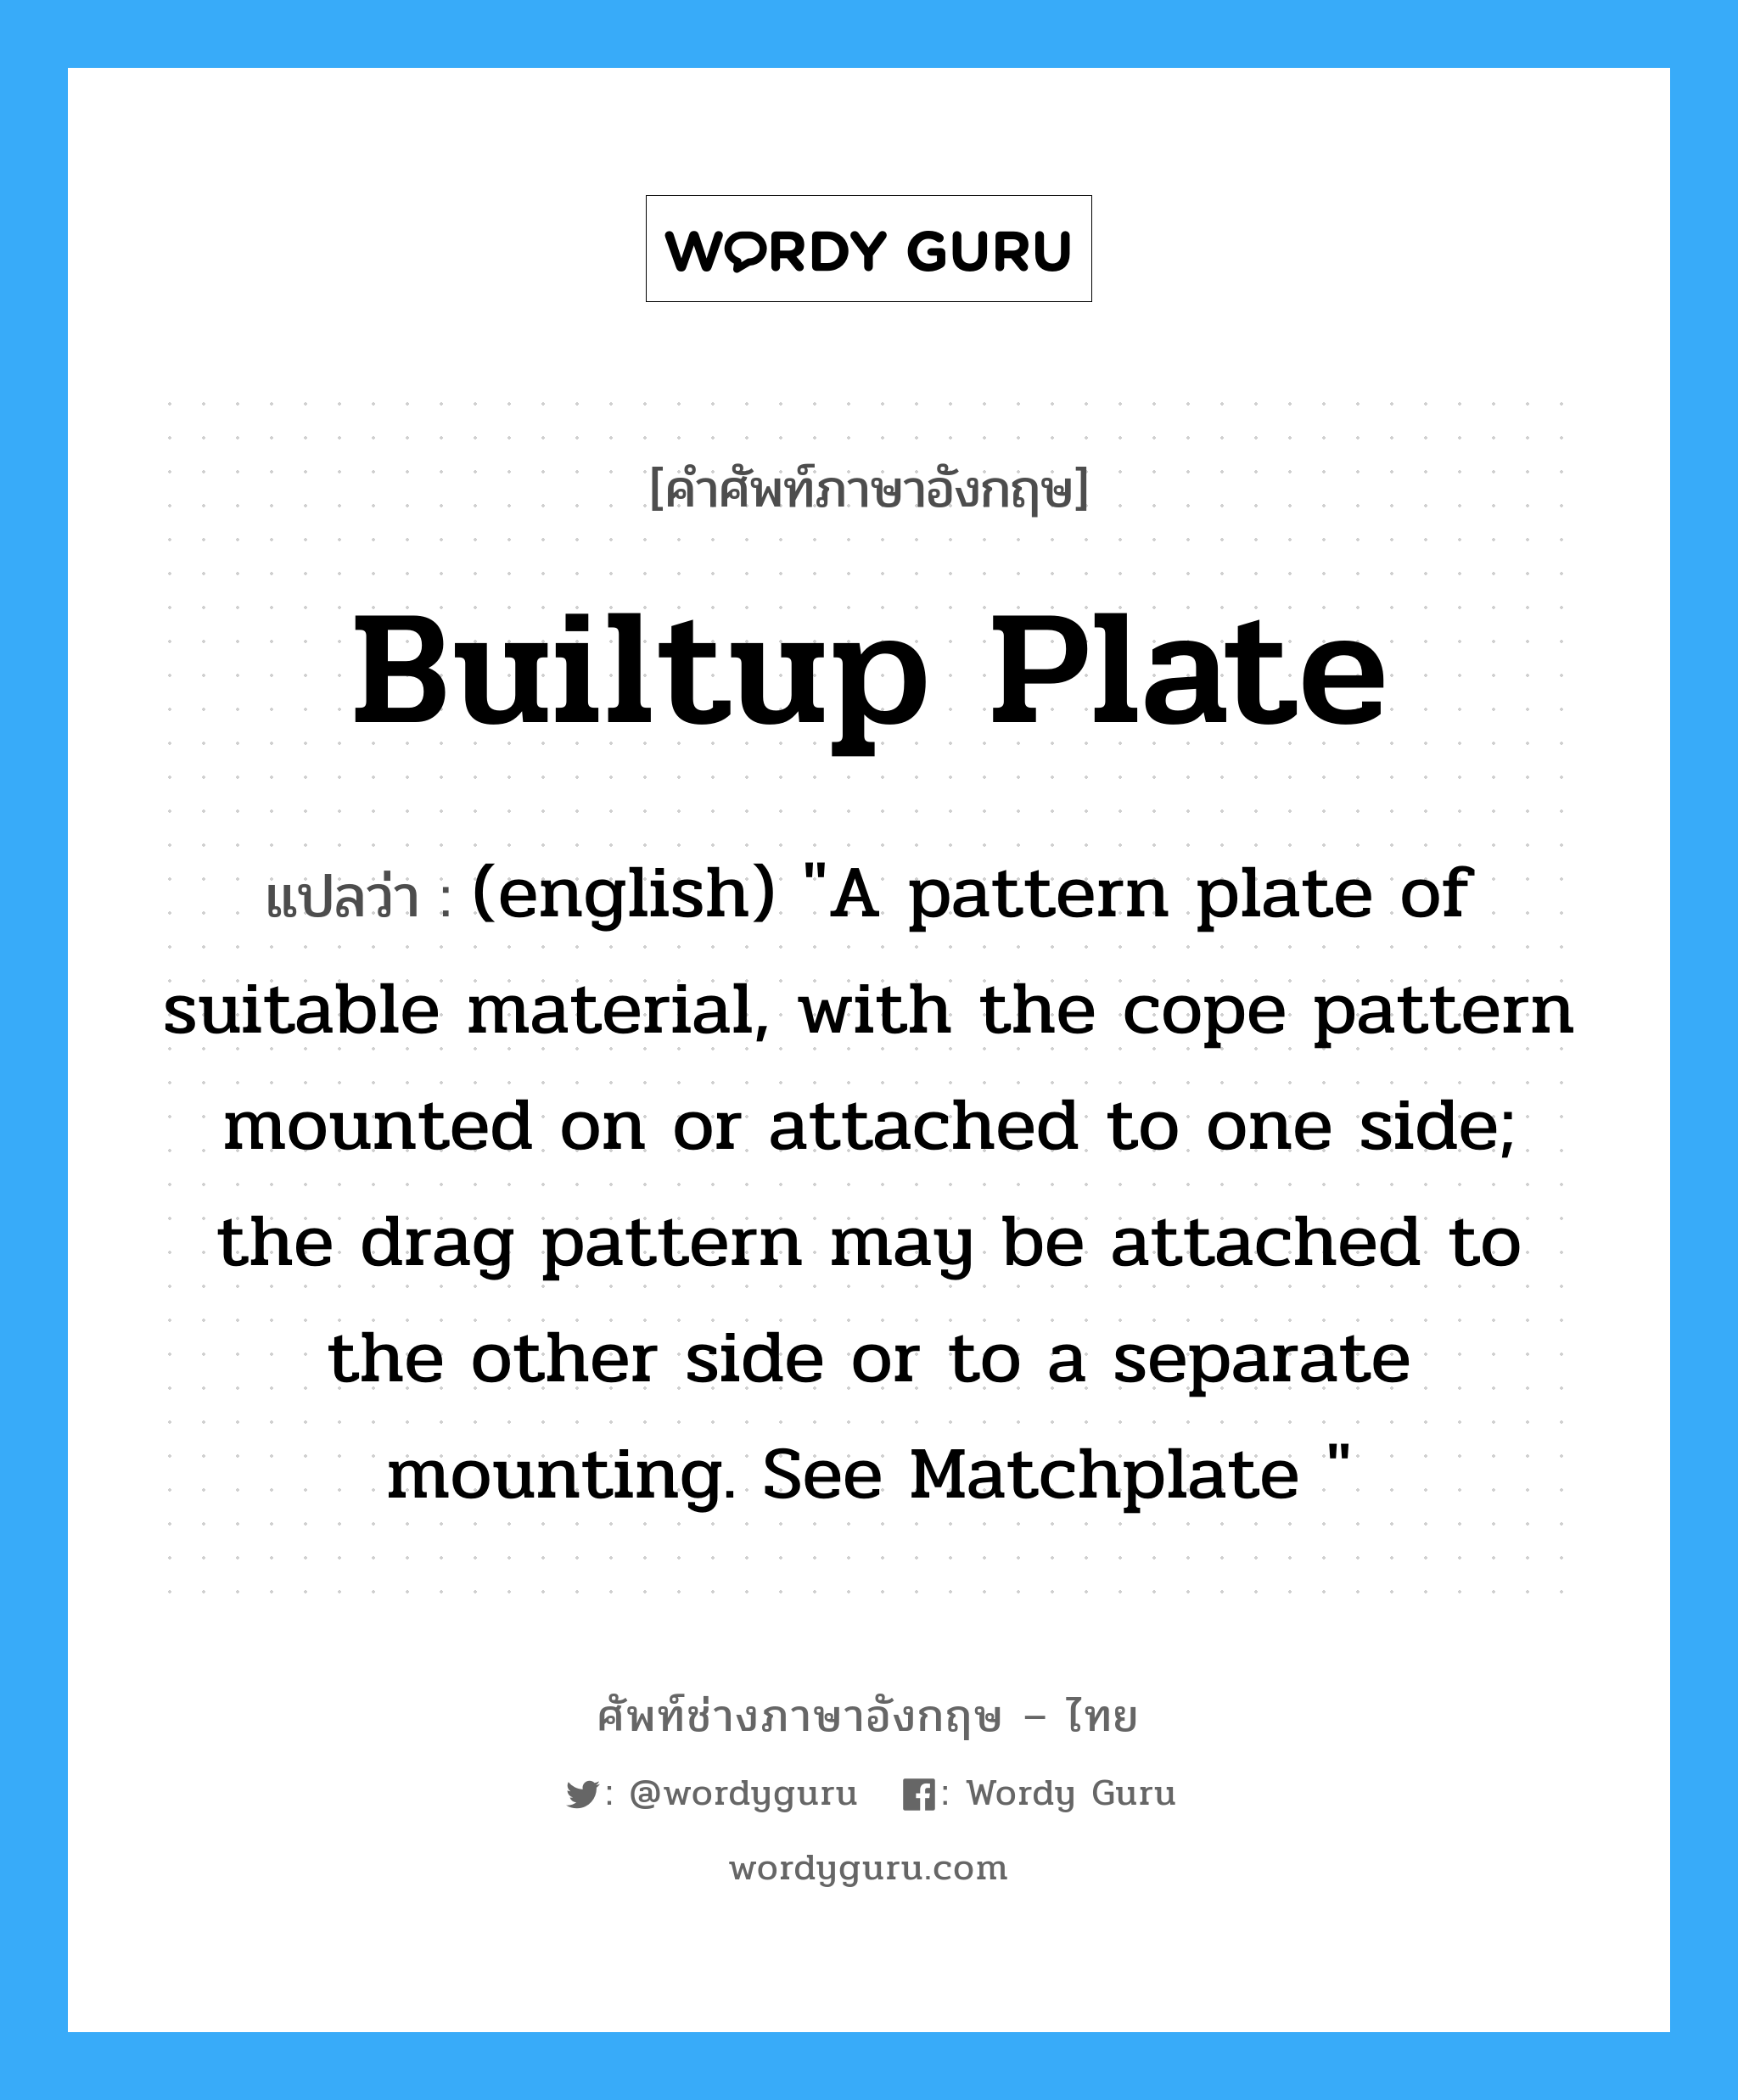 Builtup Plate แปลว่า?, คำศัพท์ช่างภาษาอังกฤษ - ไทย Builtup Plate คำศัพท์ภาษาอังกฤษ Builtup Plate แปลว่า (english) "A pattern plate of suitable material, with the cope pattern mounted on or attached to one side; the drag pattern may be attached to the other side or to a separate mounting. See Matchplate "